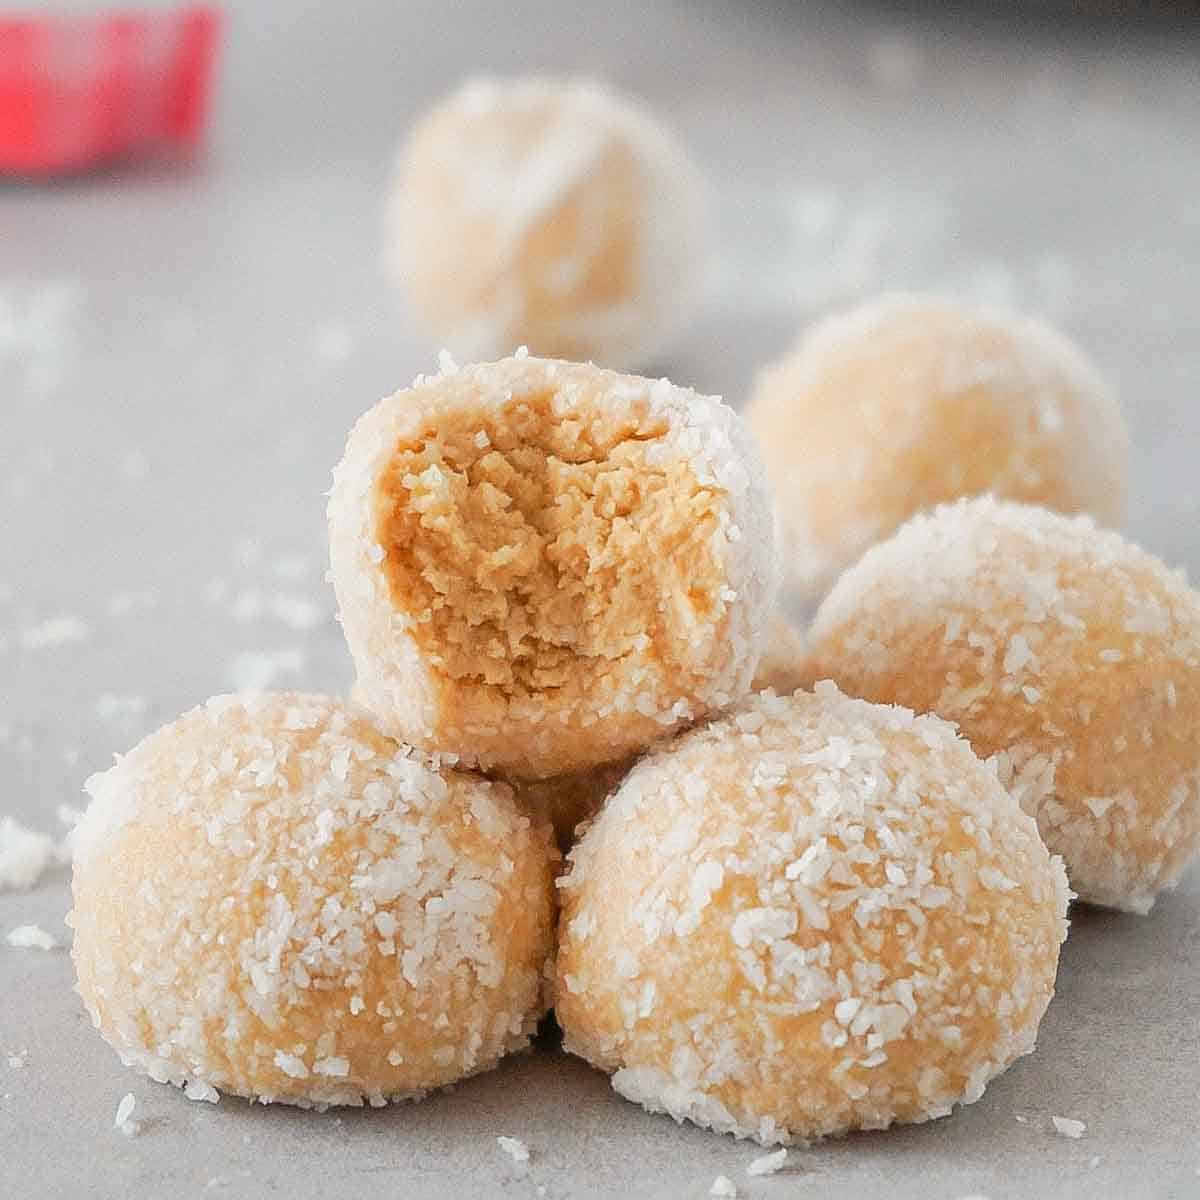 Pyramid of keto peanut butter balls covered with coconut flakes on a grey cooking surface, one bite is taken from the top one.